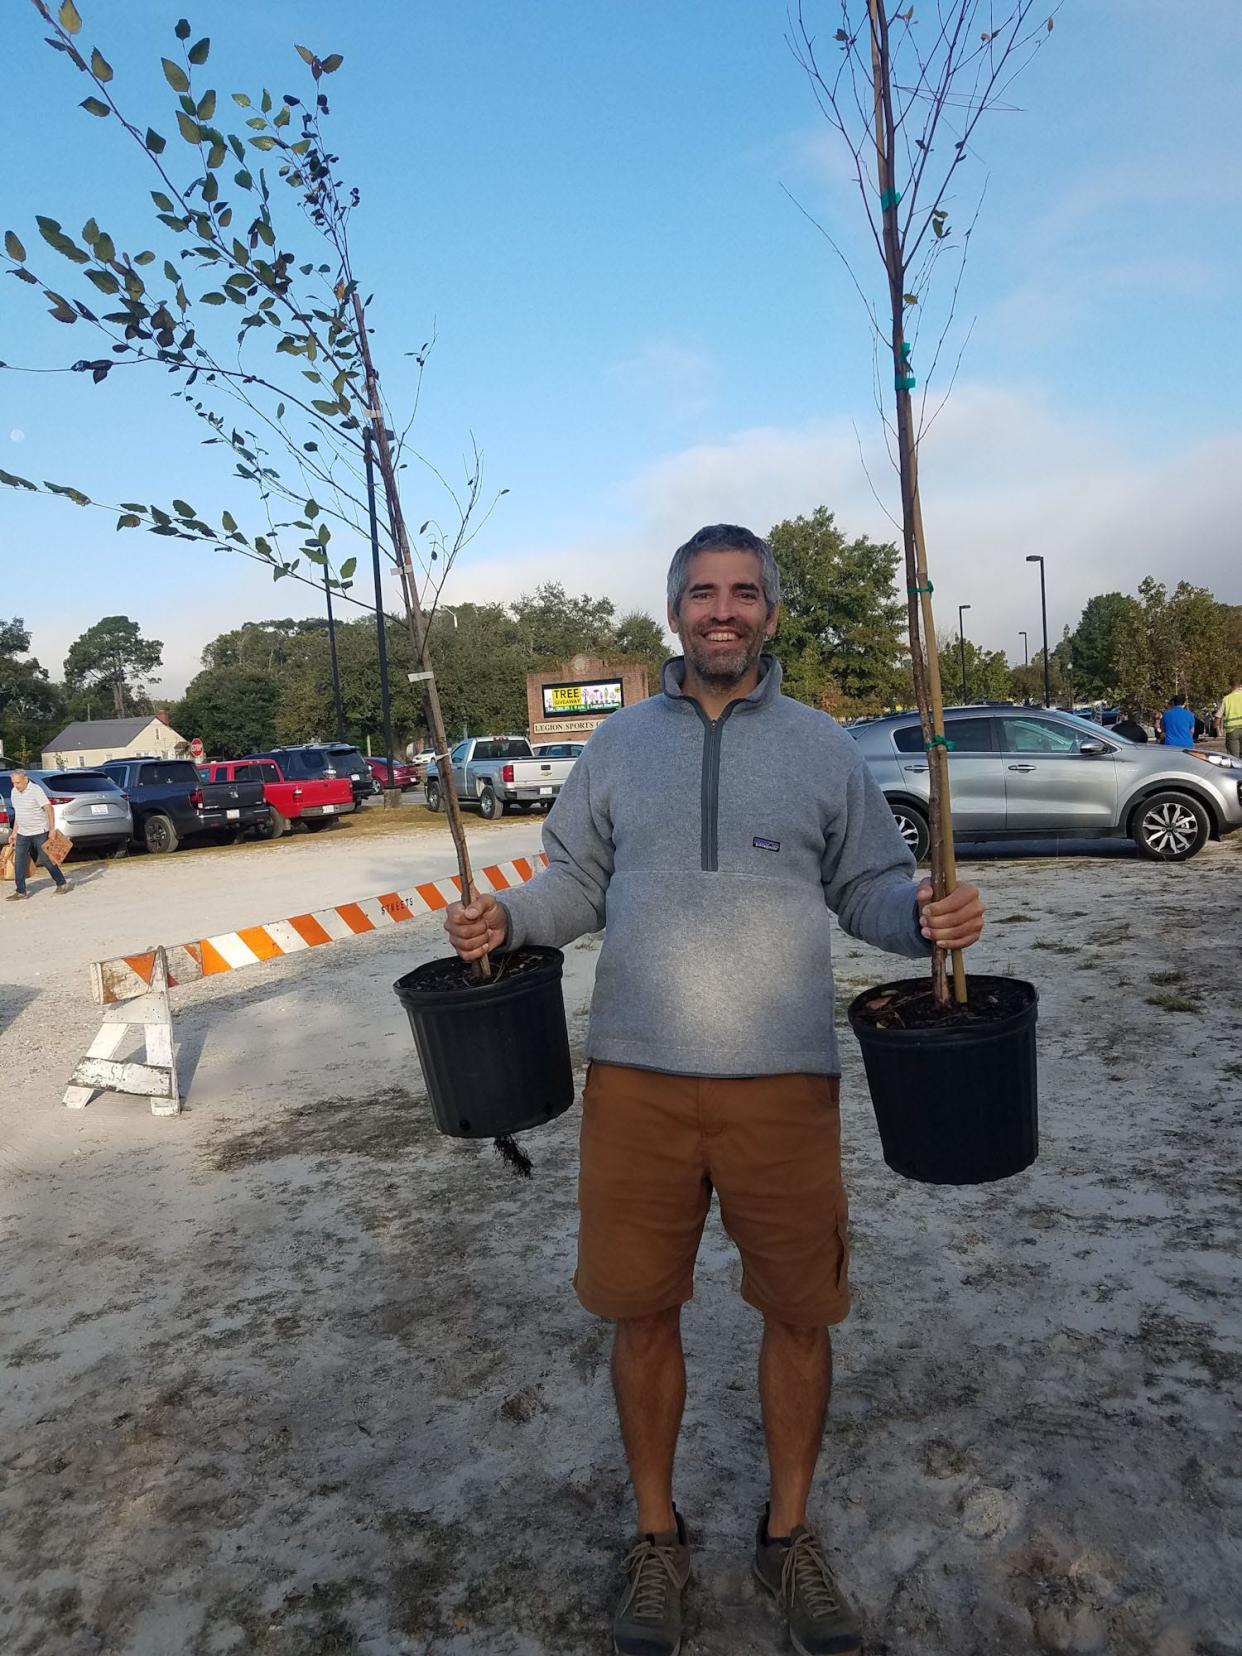 The Alliance for Cape Fear Trees' has a tree giveaway March 9 at Legion Stadium.